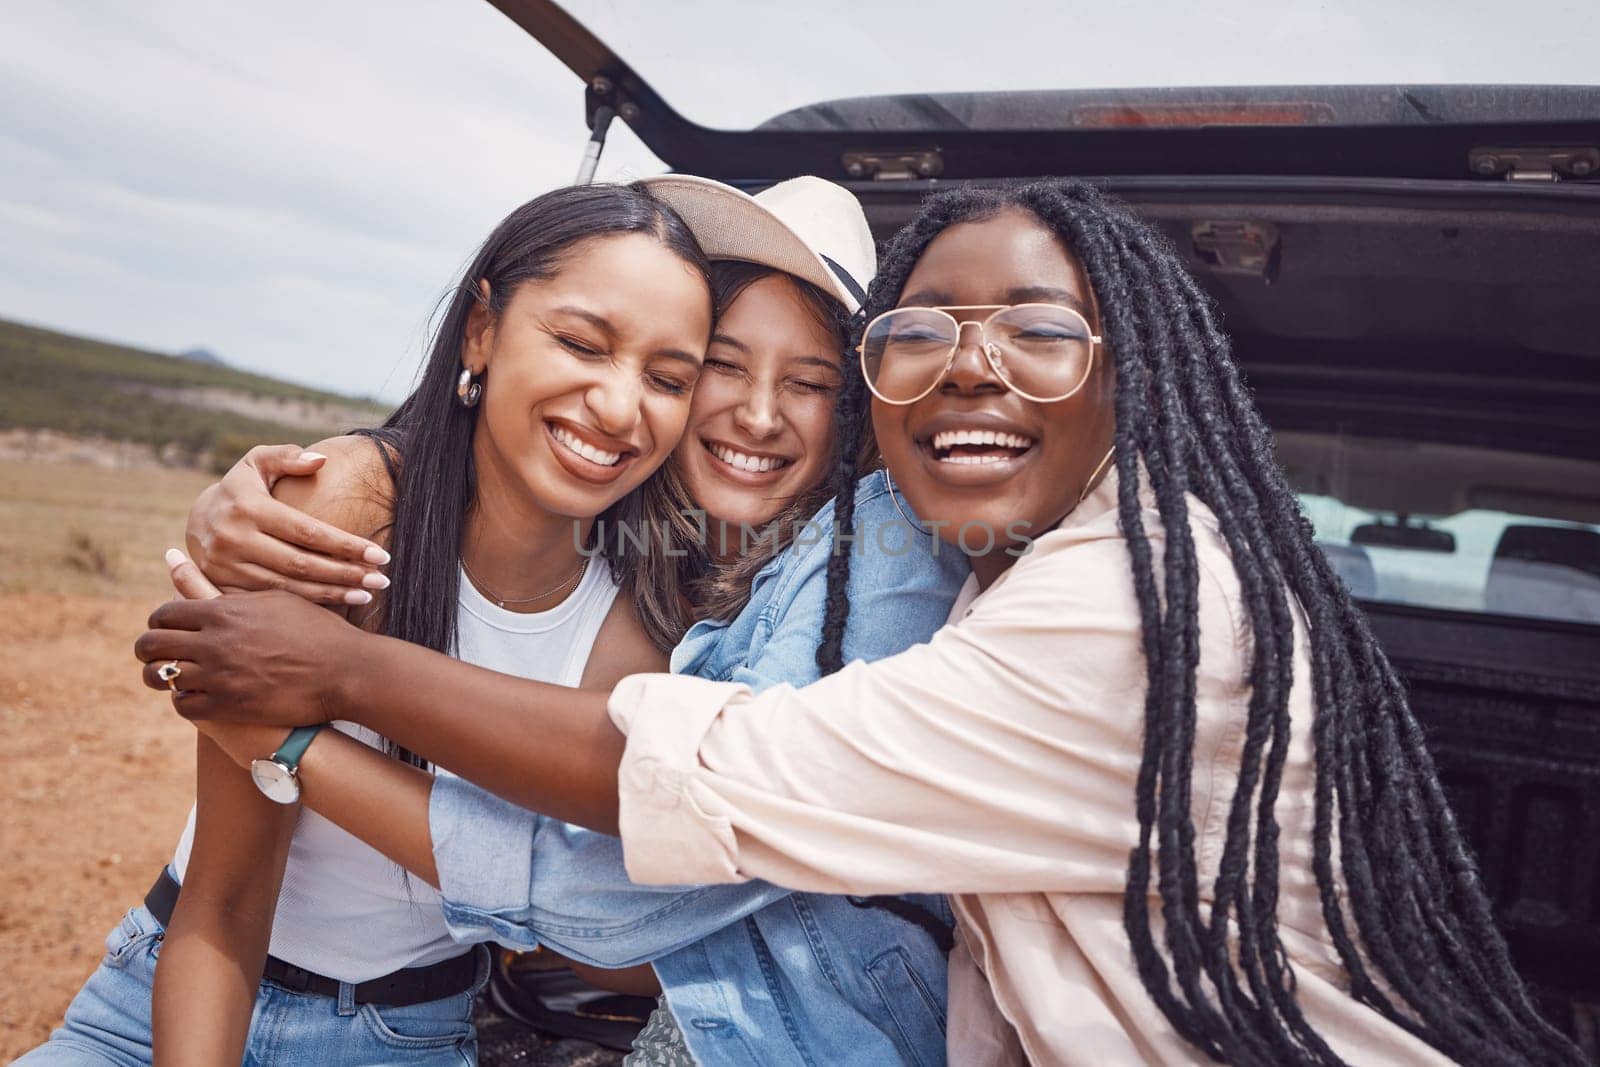 Happy, smile and hug with friends on road trip in countryside for freedom, vacation and summer break. Travel, holiday and bonding with women relax in car for adventure, journey and transportation.